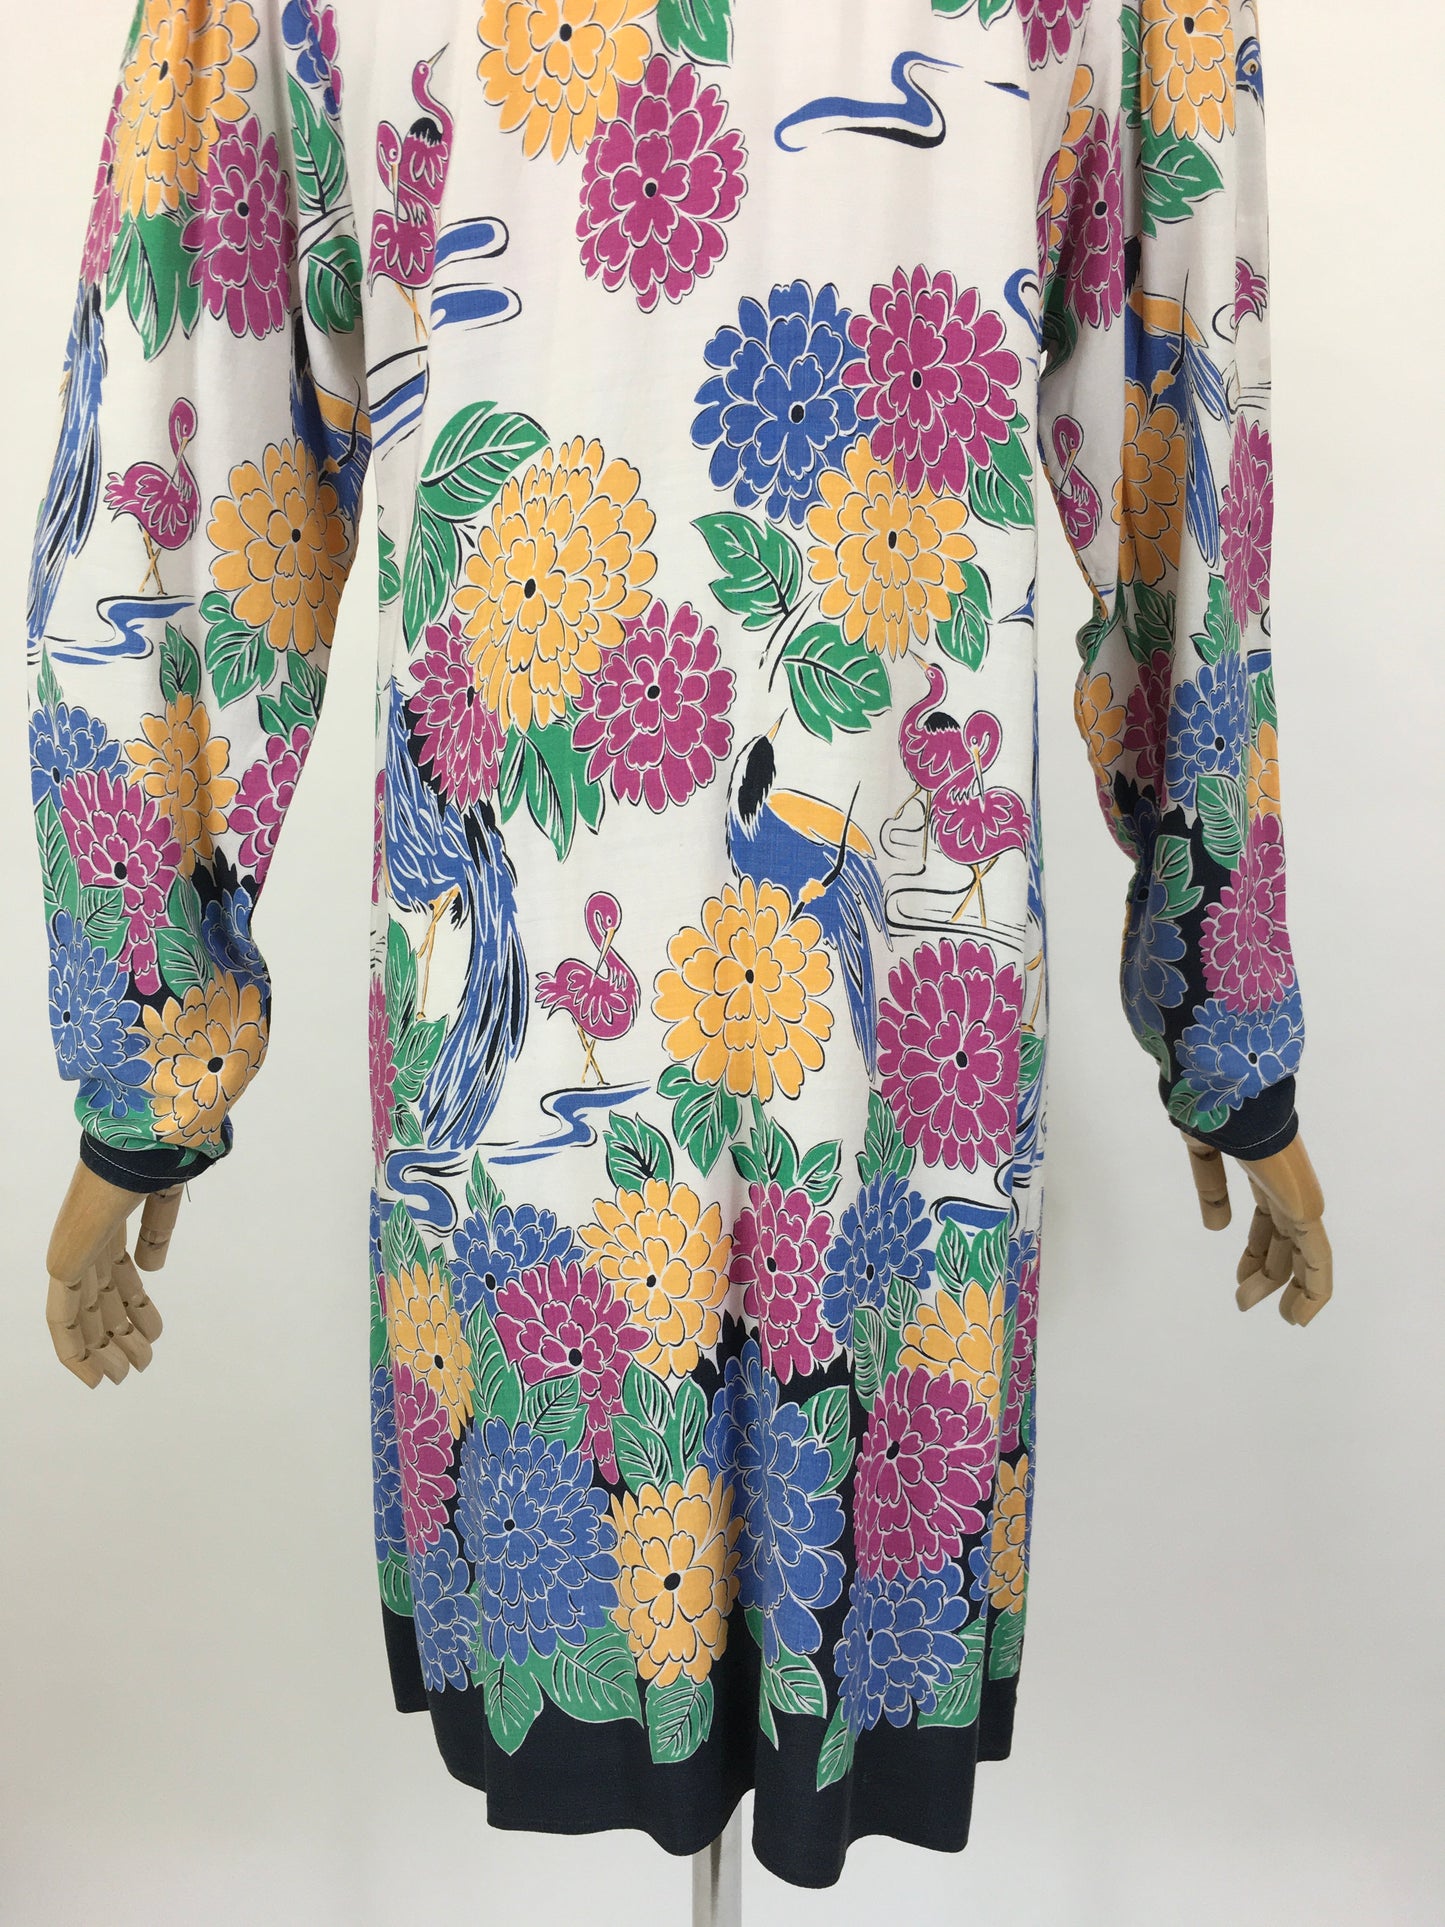 Original 1940’s SENSATIONAL Smock - With Amazing Print in Bold Bright Colours